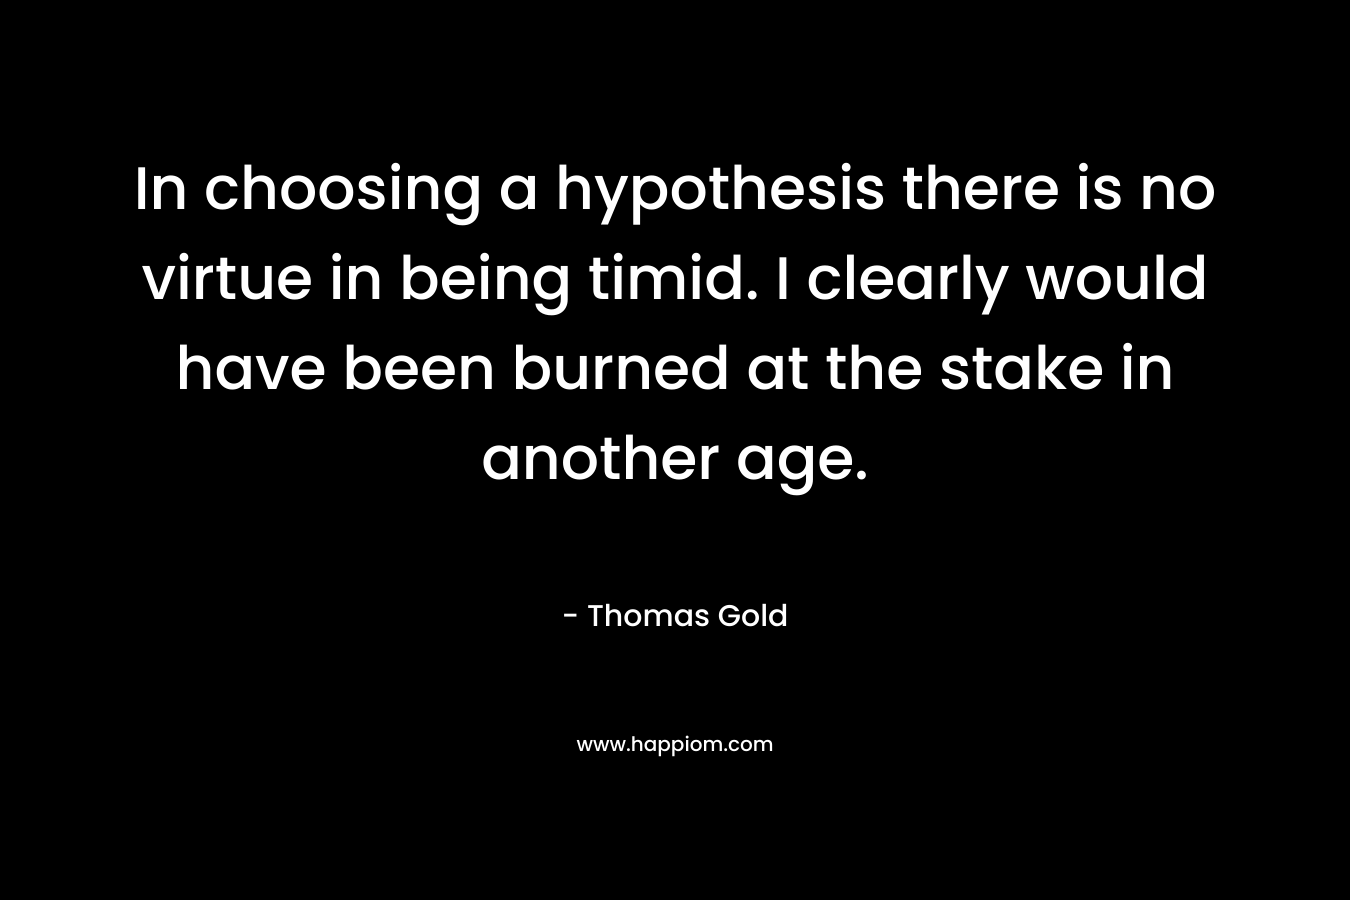 In choosing a hypothesis there is no virtue in being timid. I clearly would have been burned at the stake in another age. – Thomas Gold